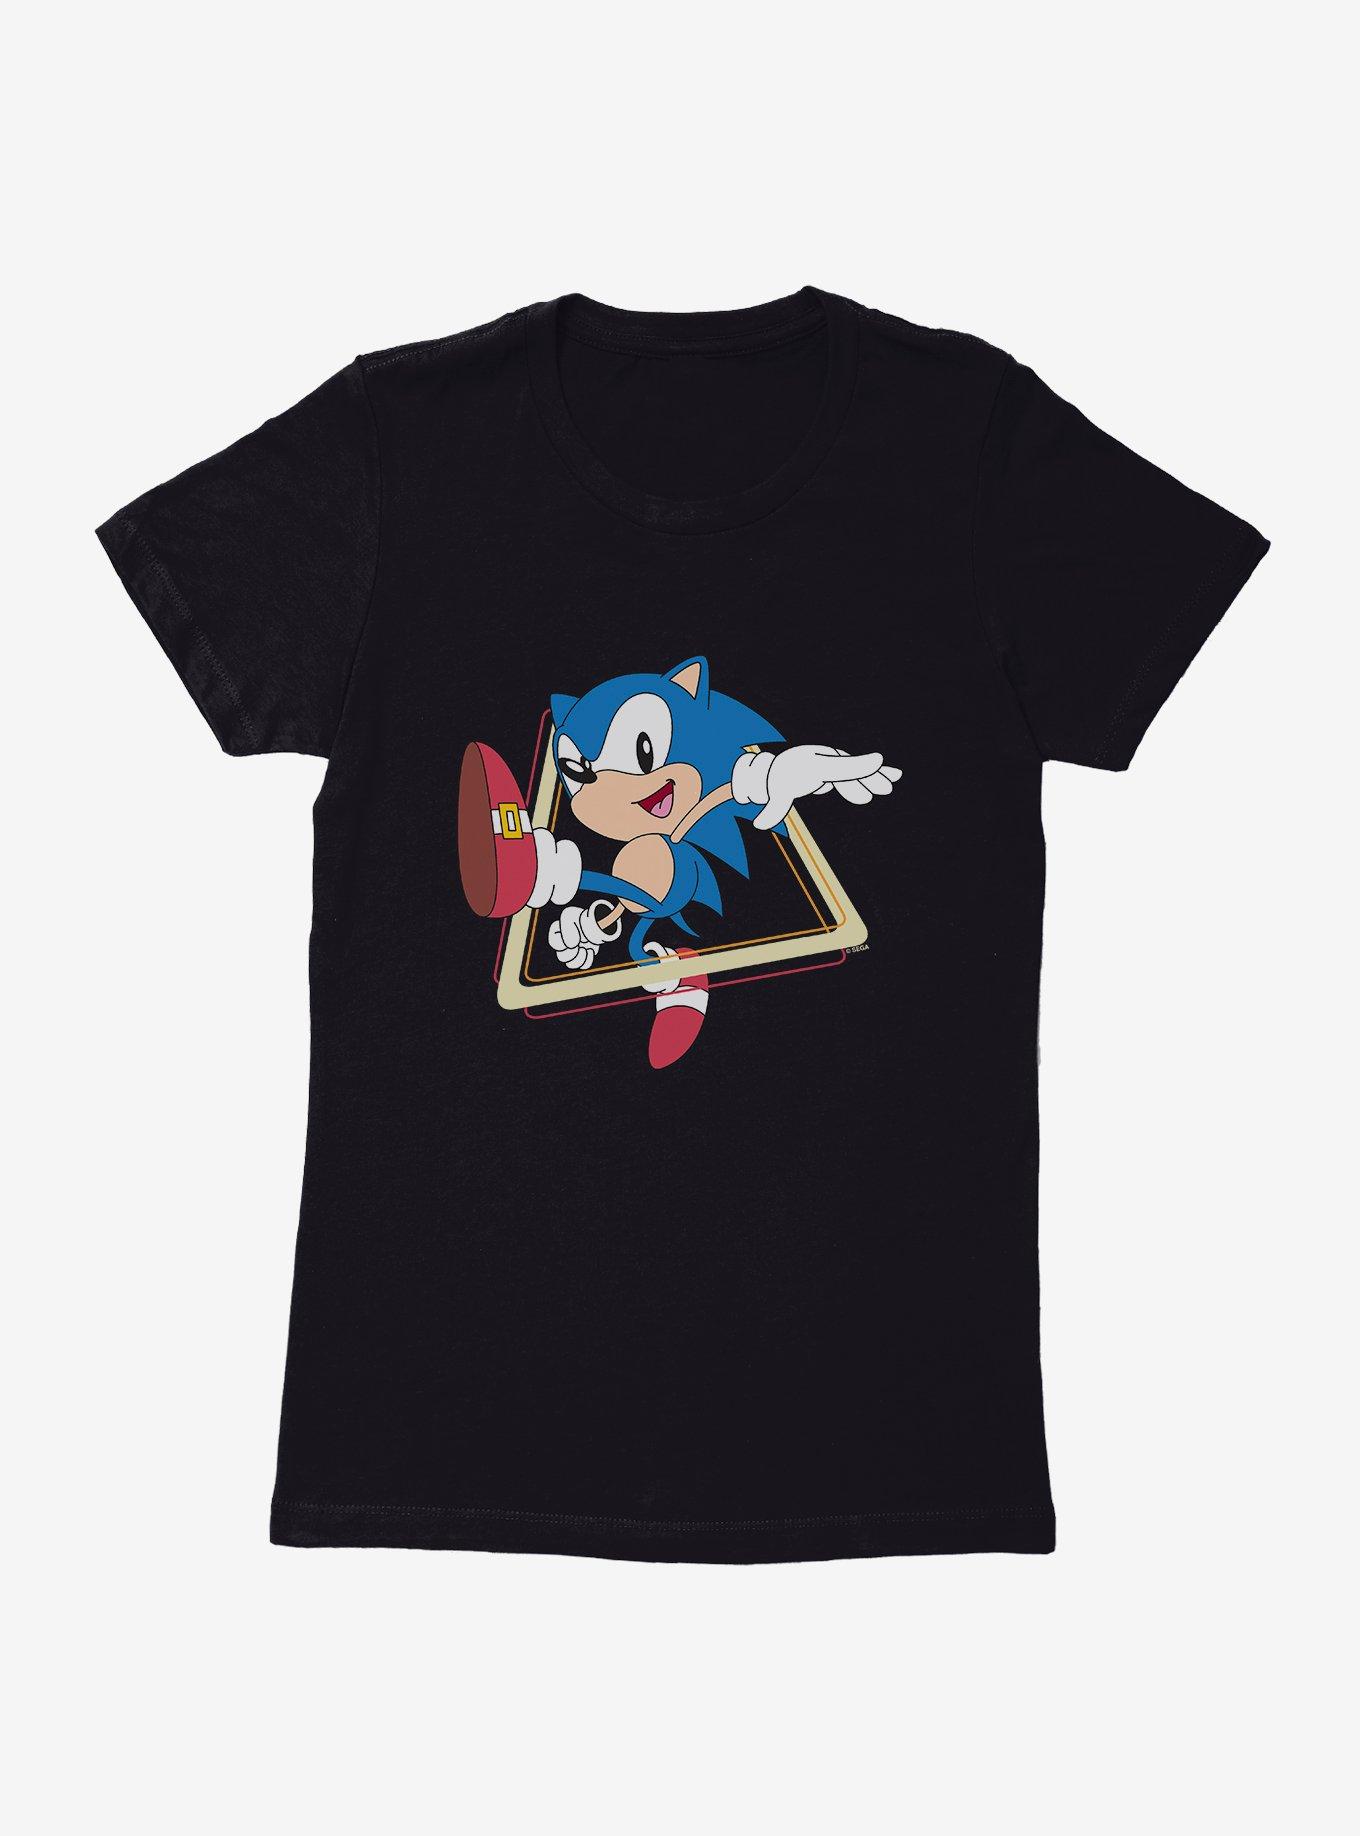 Sonic The Hedgehog Leaps And Bounds Womens T-Shirt, BLACK, hi-res